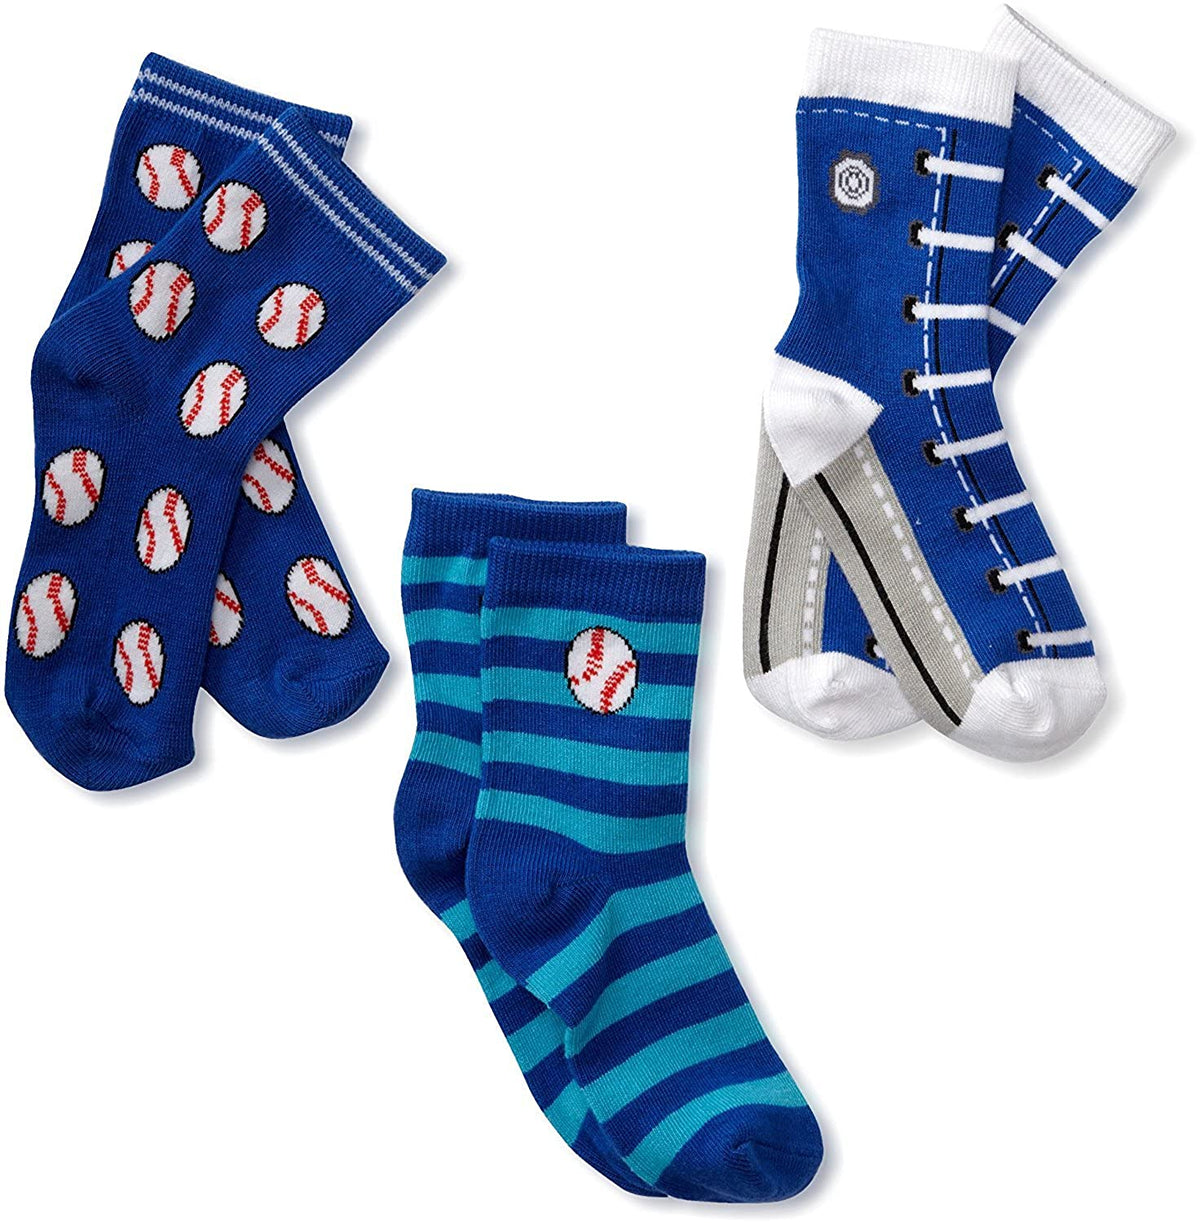 Footprints Super soft Organic cotton and bamboo socks- Pack of 3 - (12-24 Months)- Boys - Blue